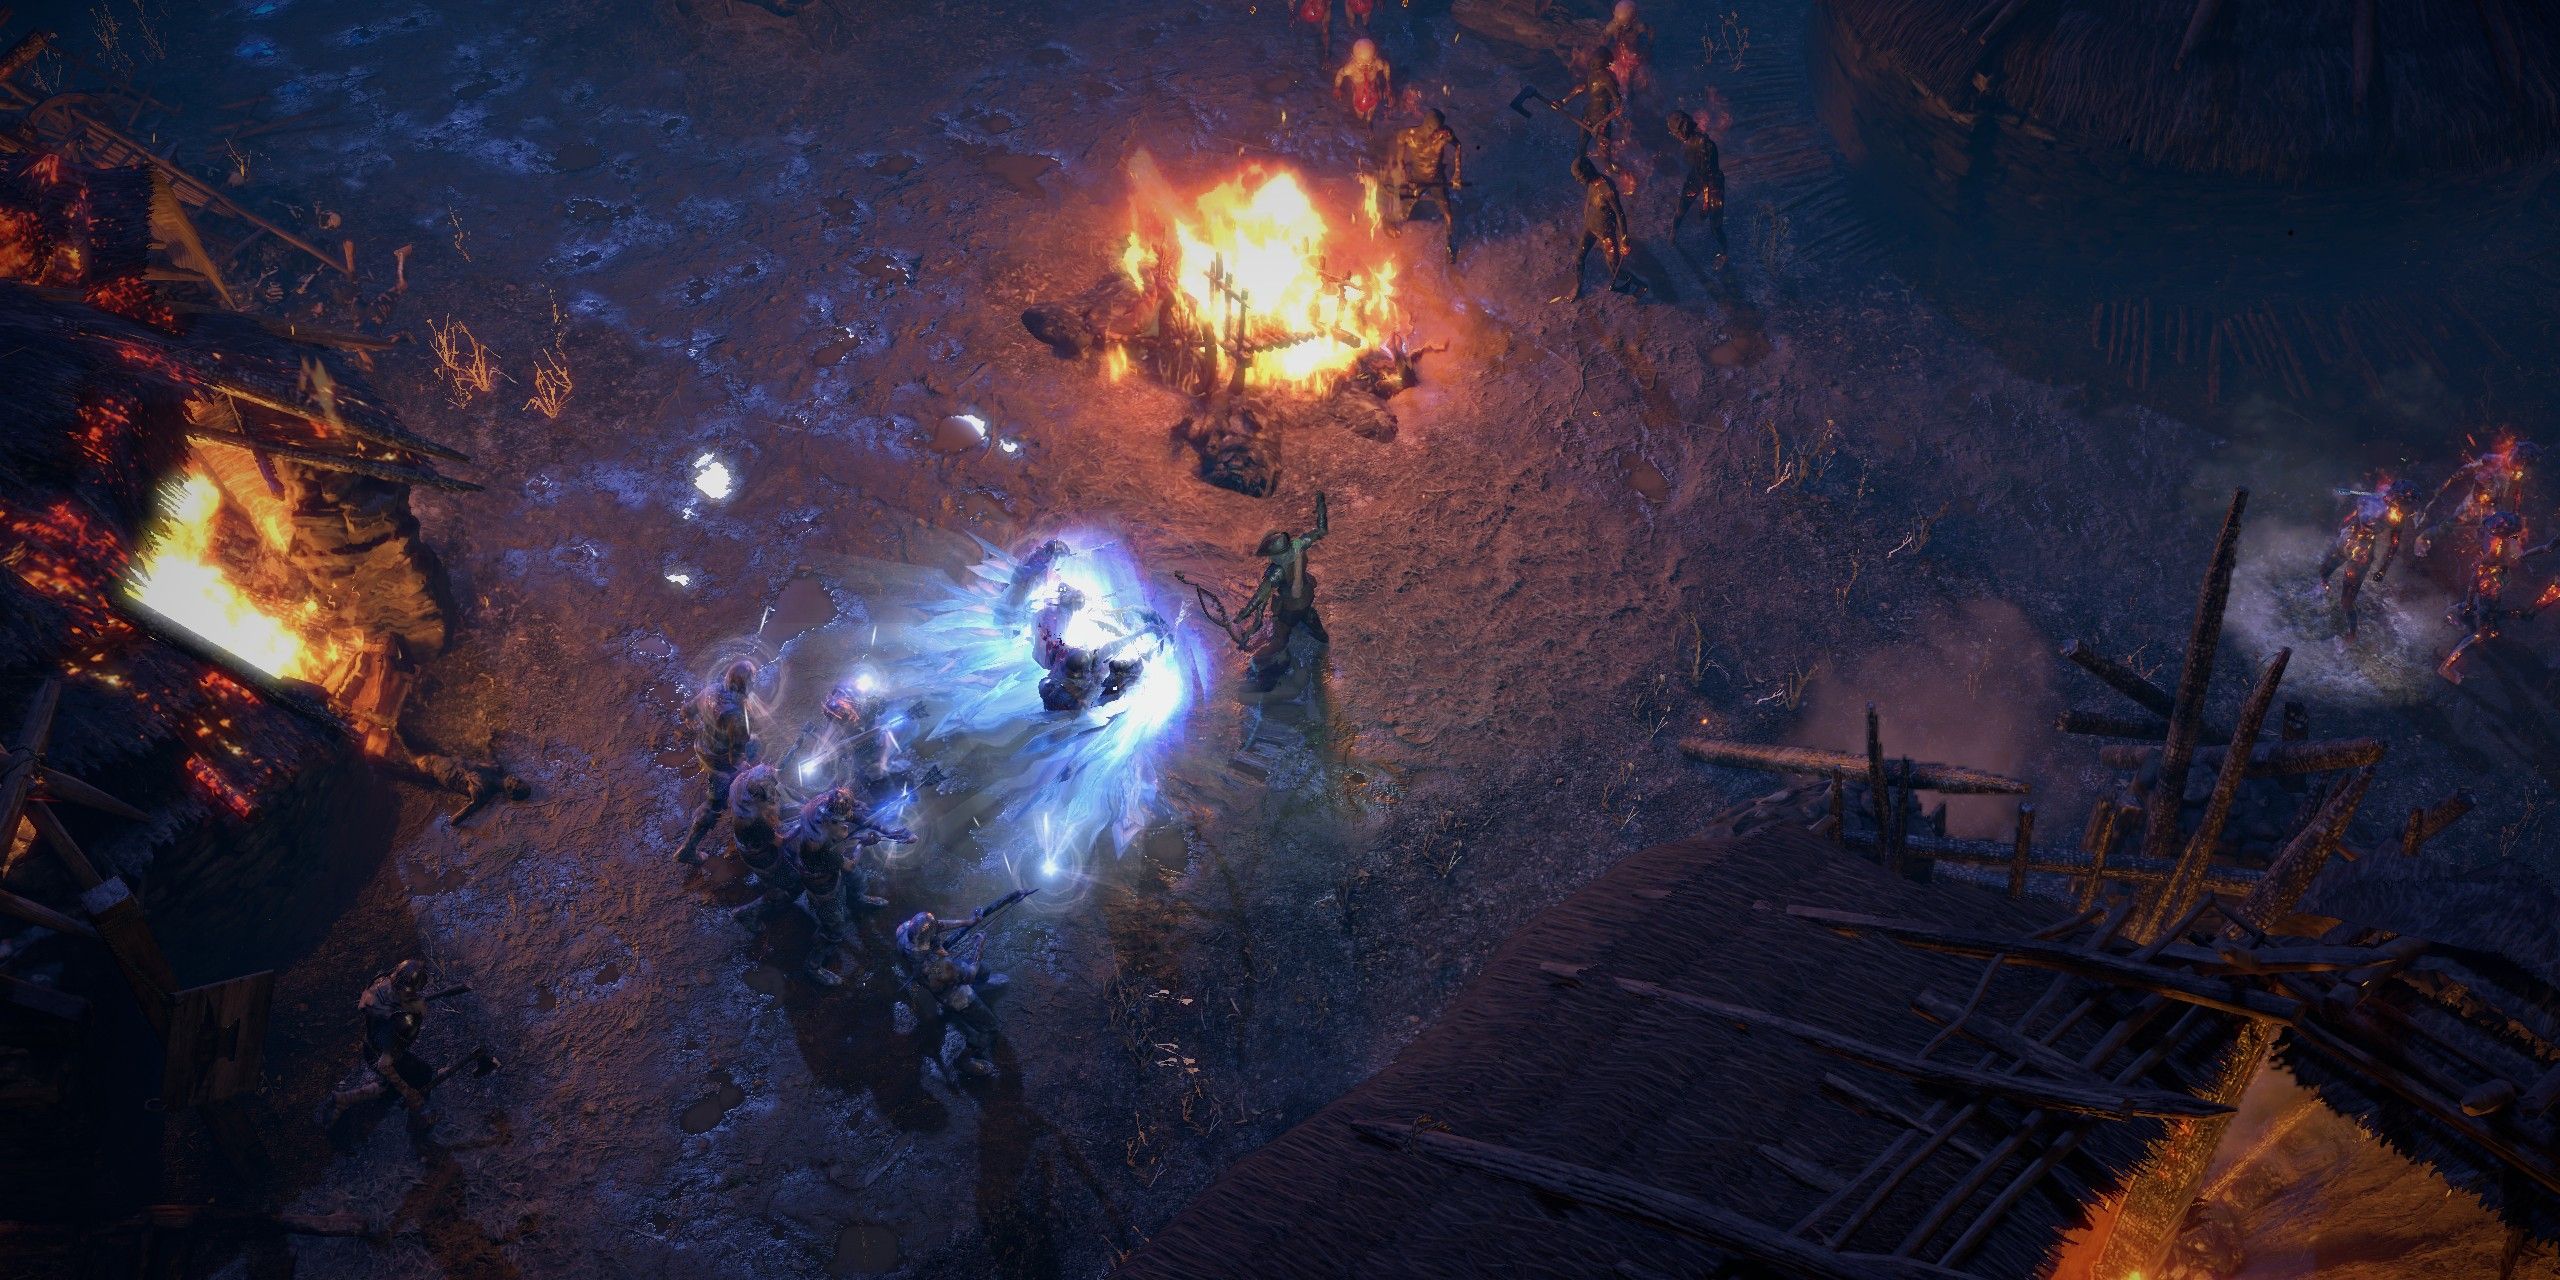 path of exile wiki fire and lightning build